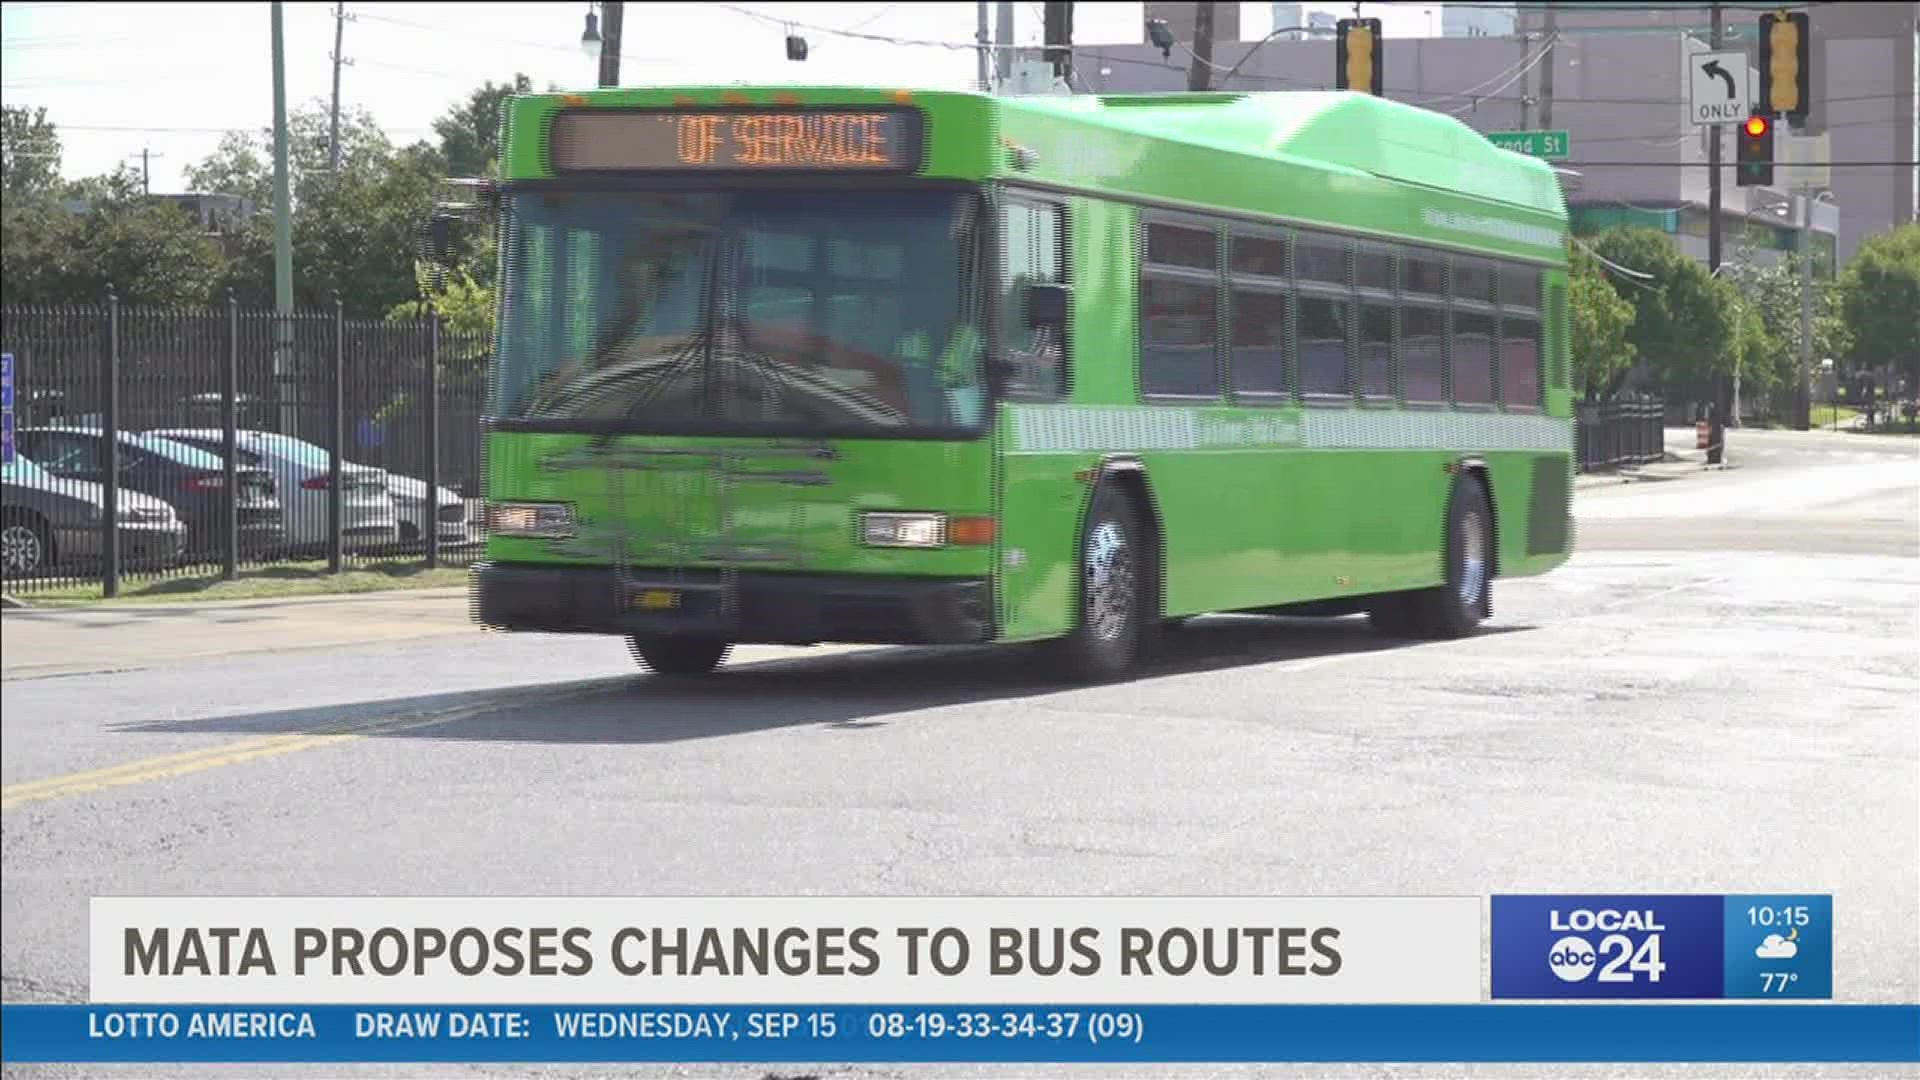 The changes vary, from decreasing bus frequency to adding more connections on a route. A handful of fixed routes could be discontinued all together.